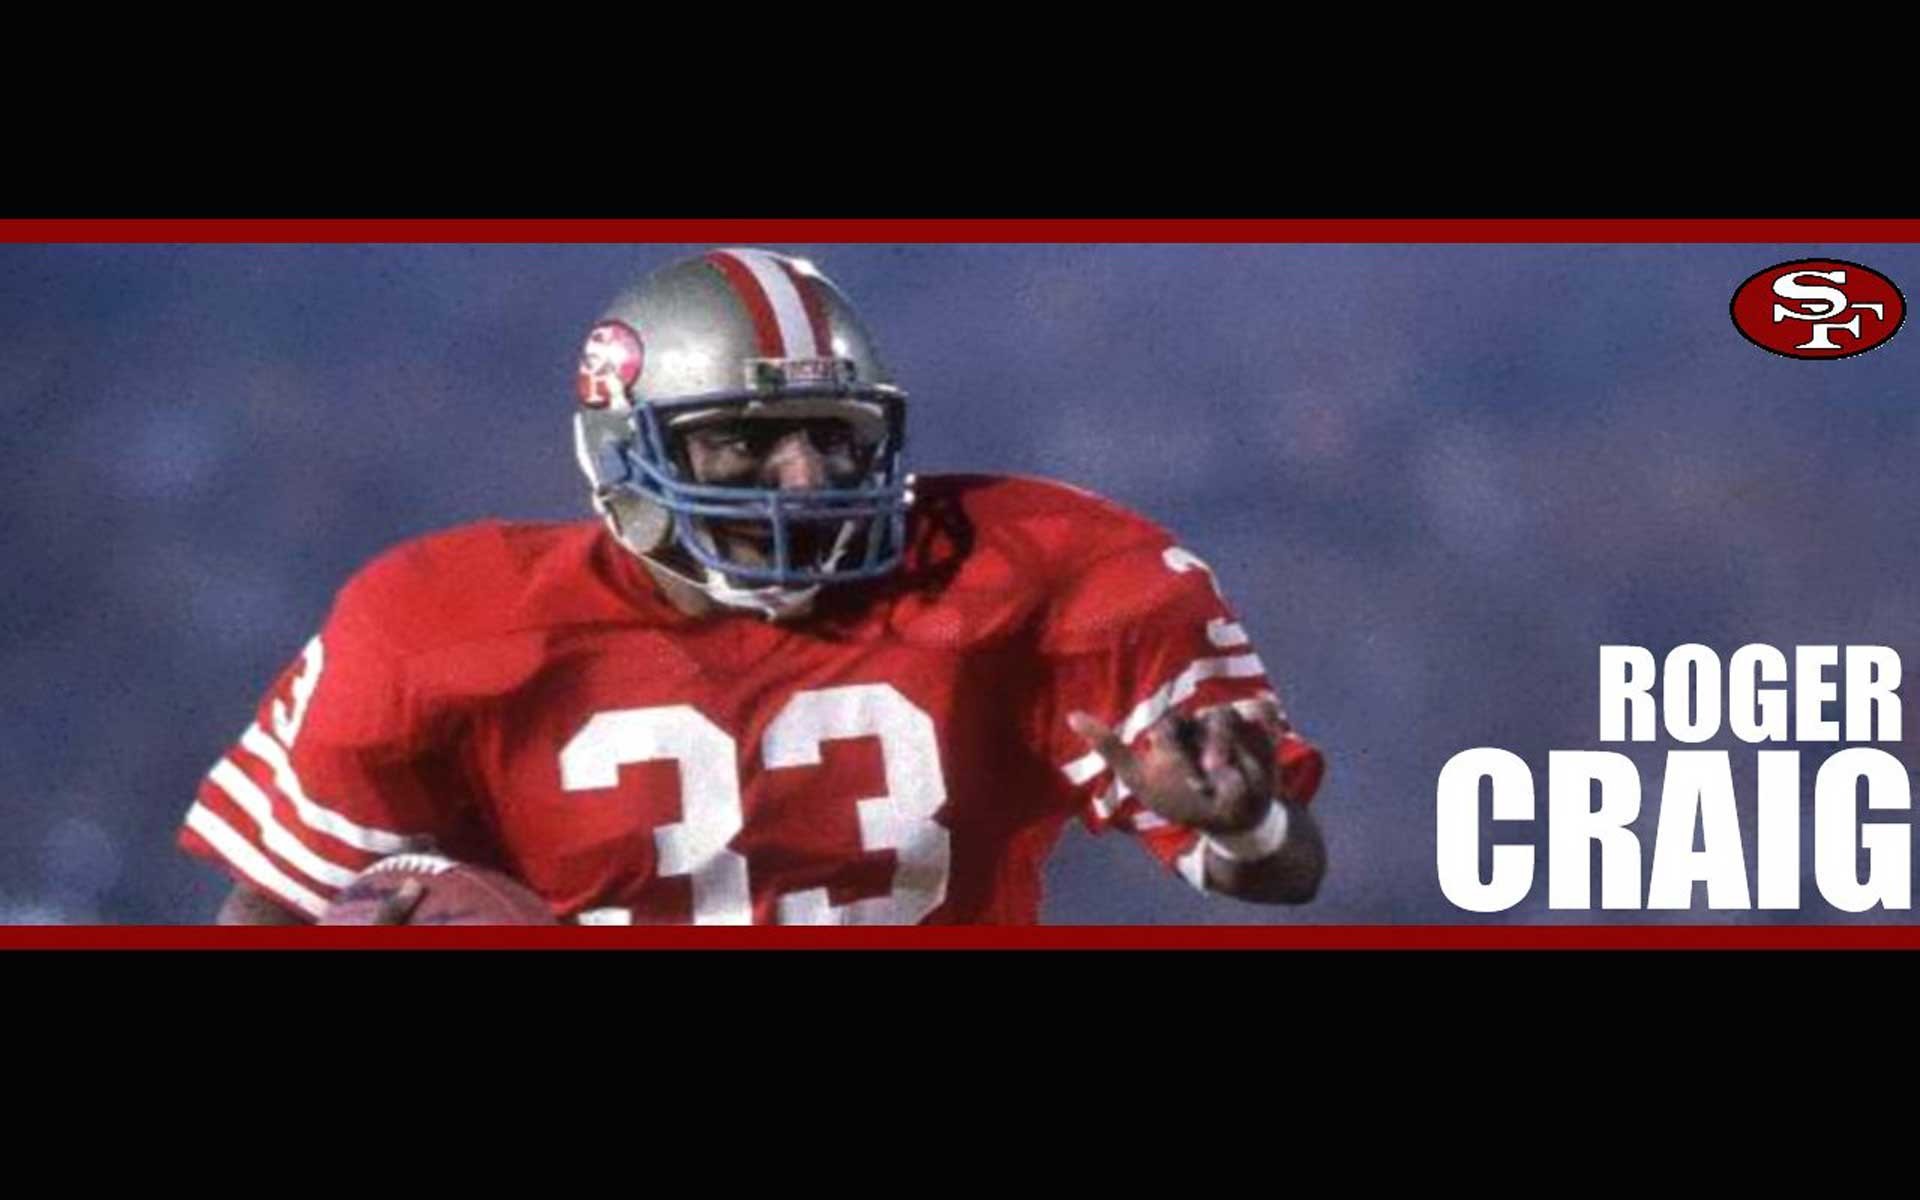 Roger Craig SF 49ers Wallpapers.